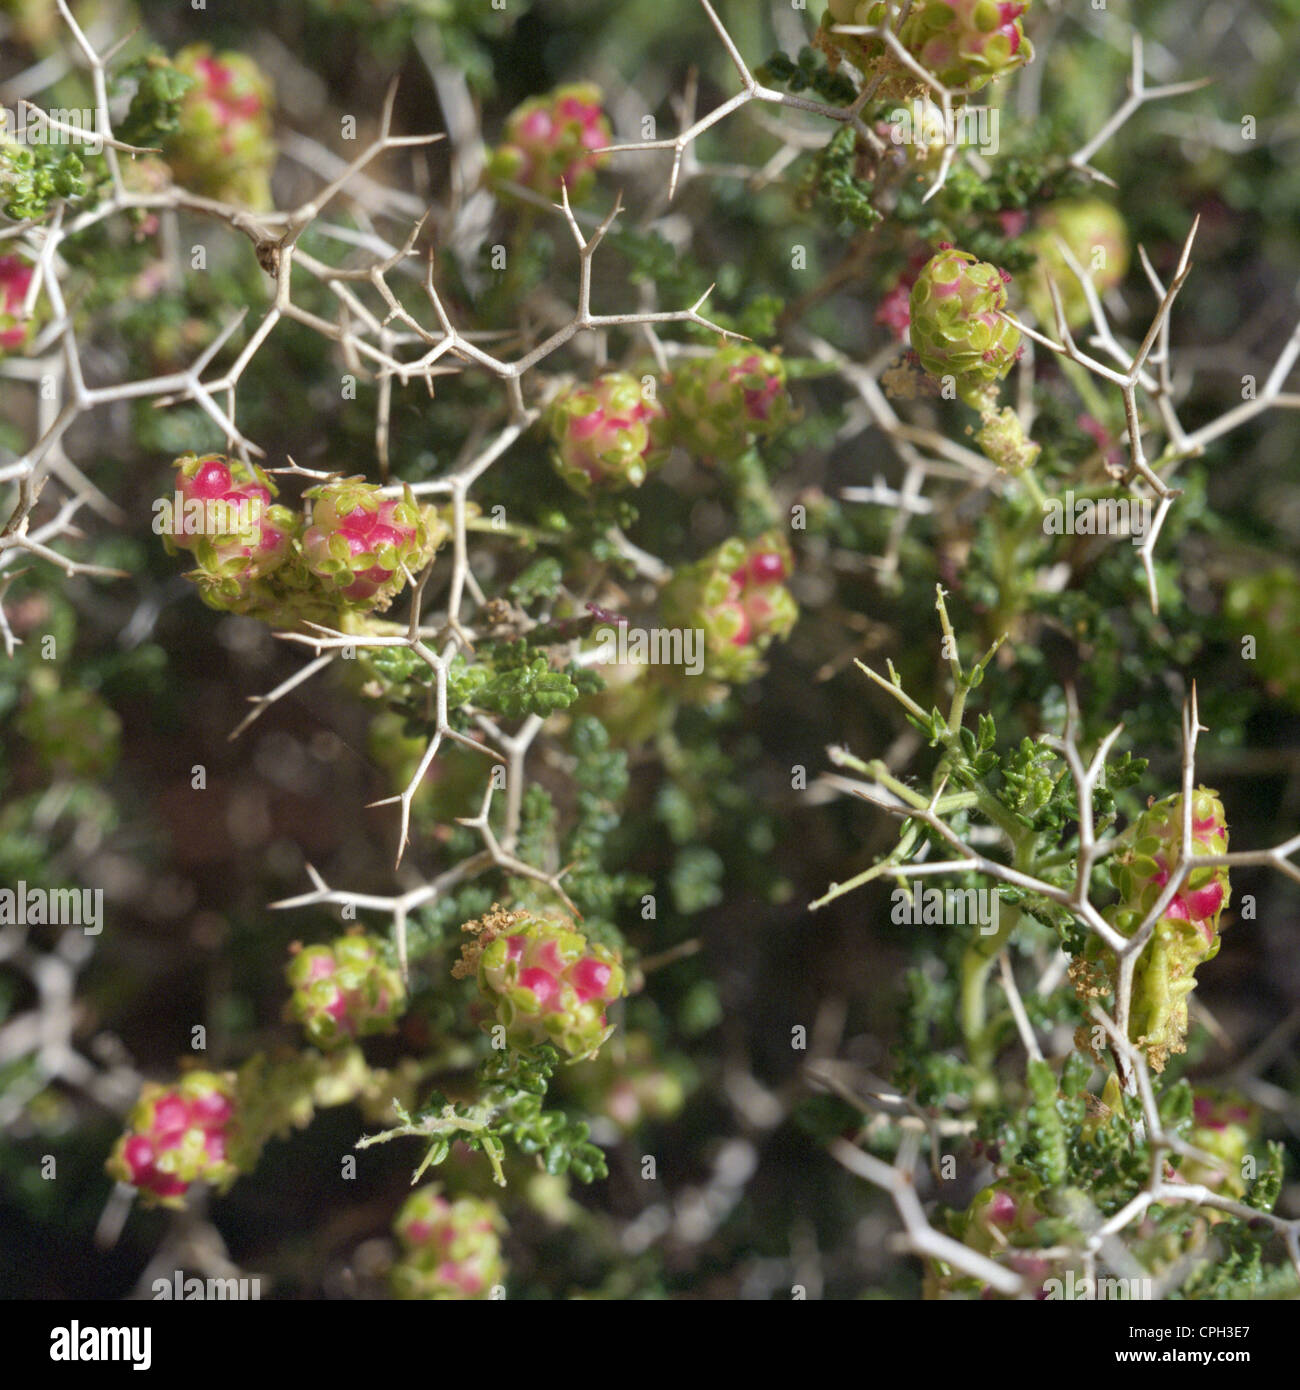 Close-up view of Sarcopoterium spinosum, also known as brushwood, thorny burnet or prickly burnet. Stock Photo